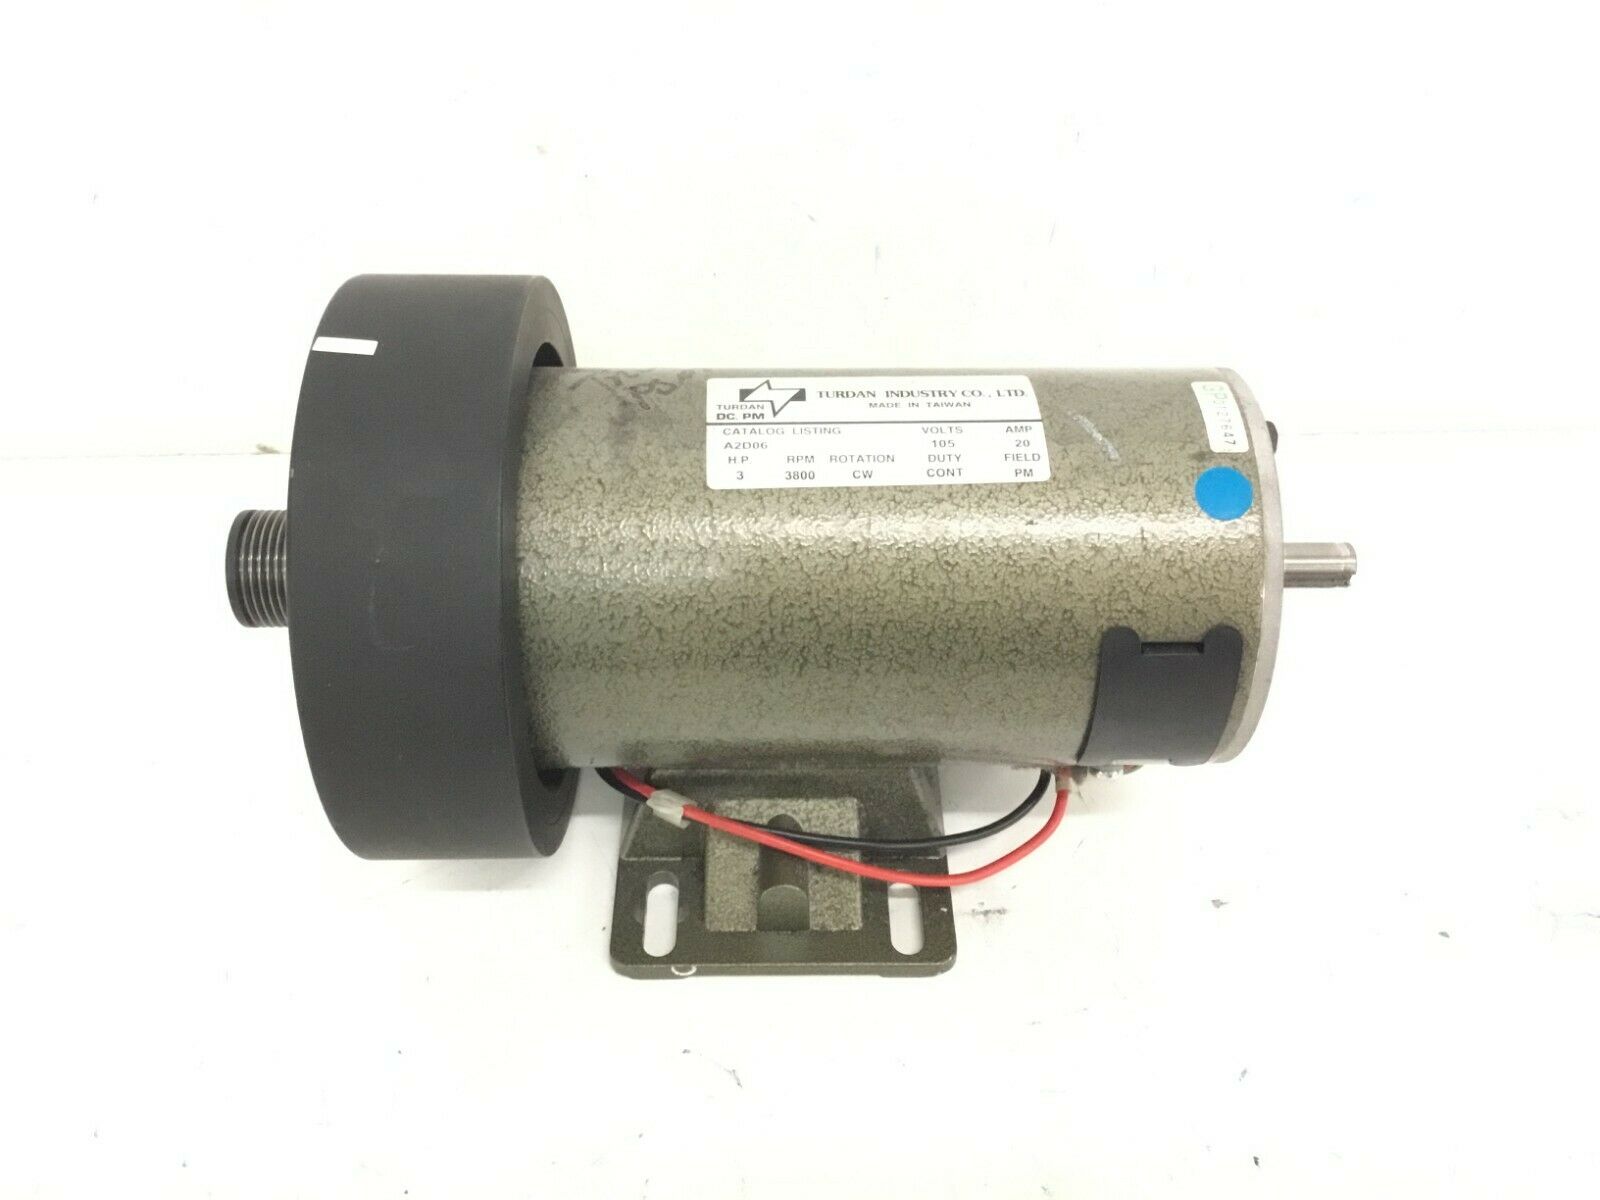 True Fitness TM30 M30 Treadmill 3 HP DC Drive Motor With Mount A2D06 (Used)